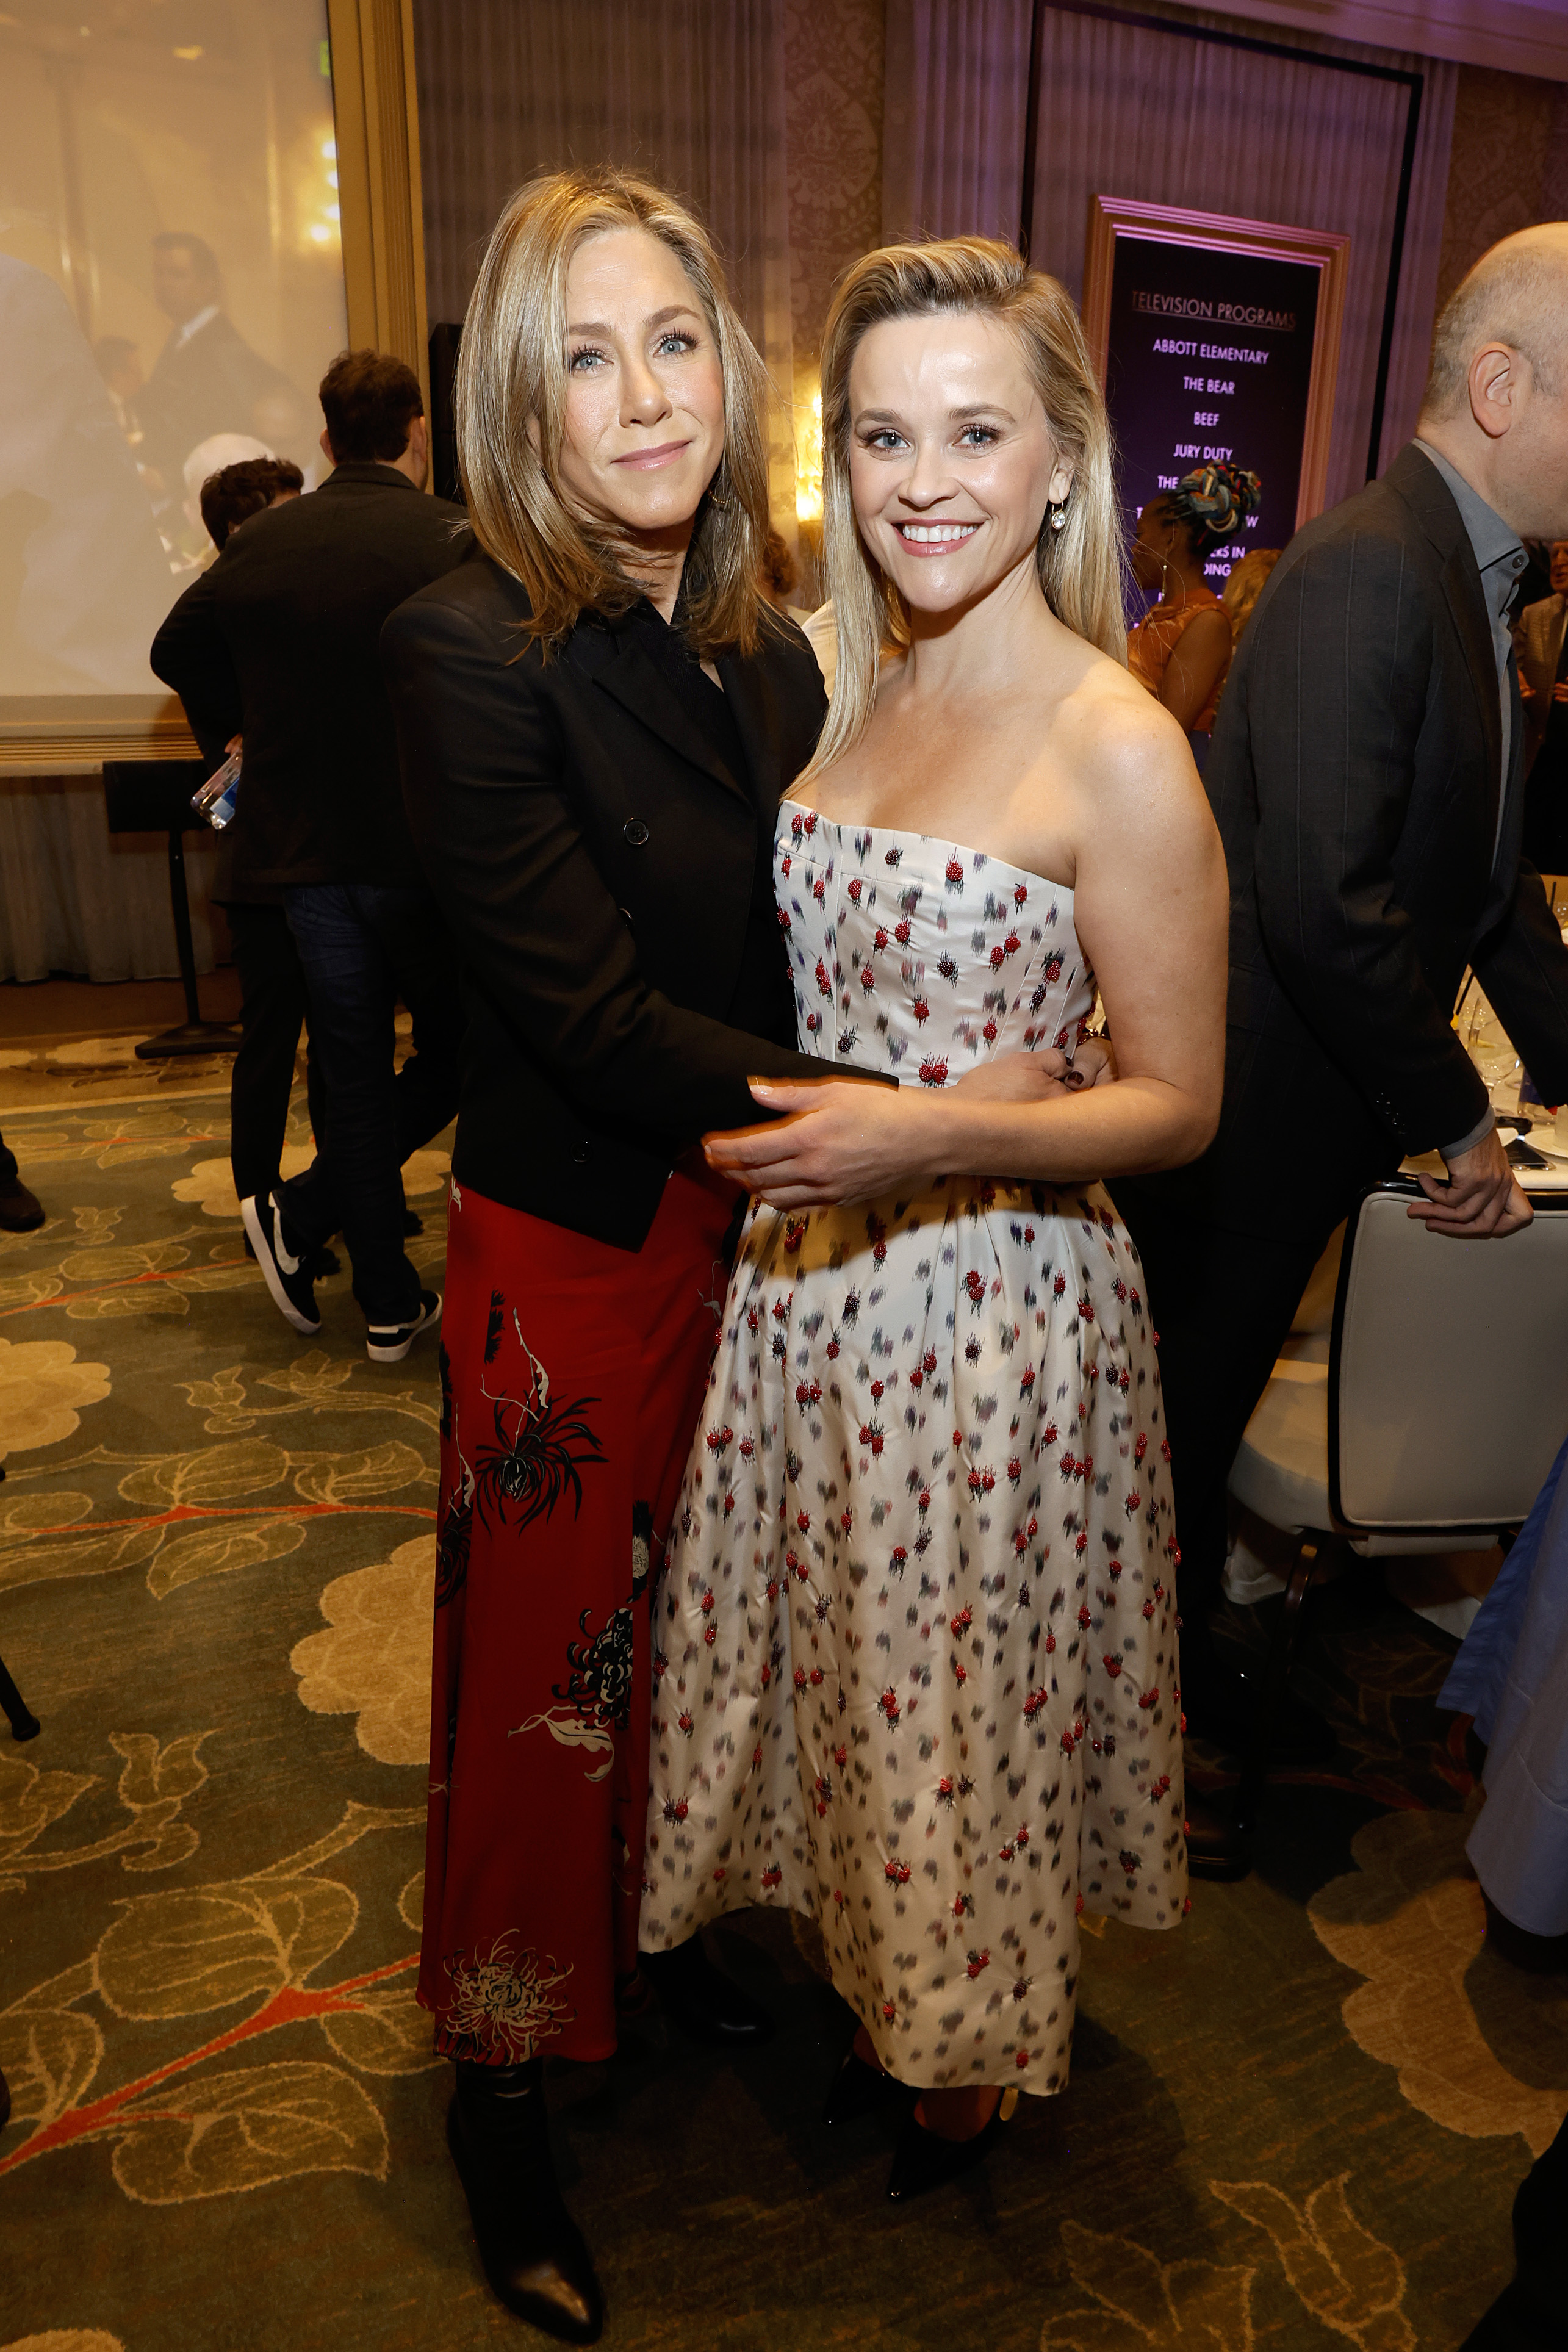 The Morning Show co-stars Jennifer Aniston, 54, and Reese Witherspoon, 47, were also at the event